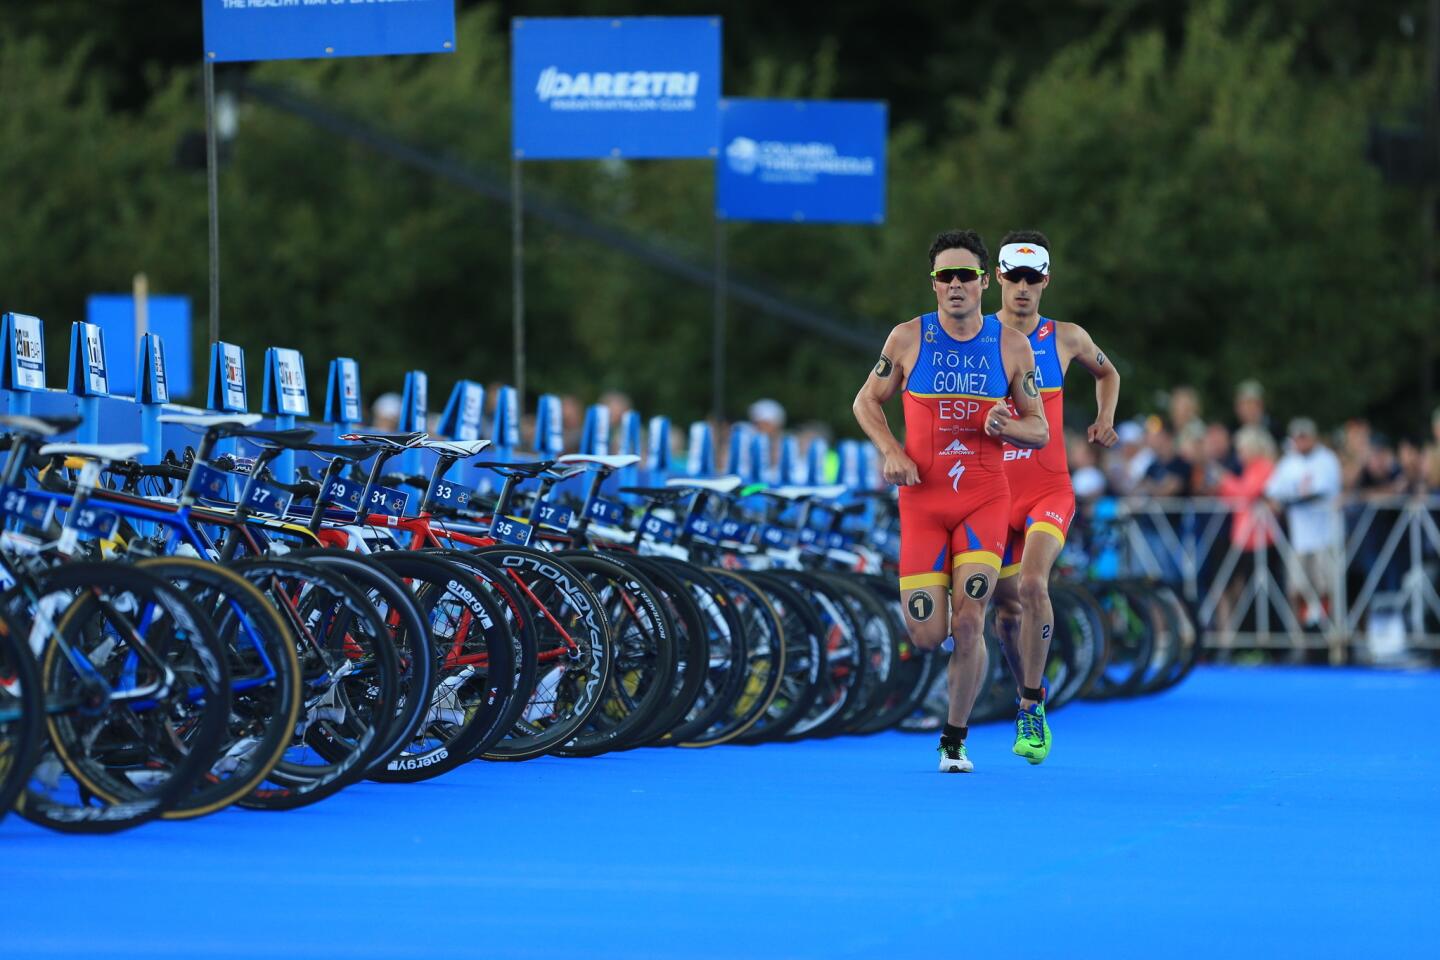 Javier Gomez Nova, left, works to maintain first place during the ITU World Triathlon Grand Final.